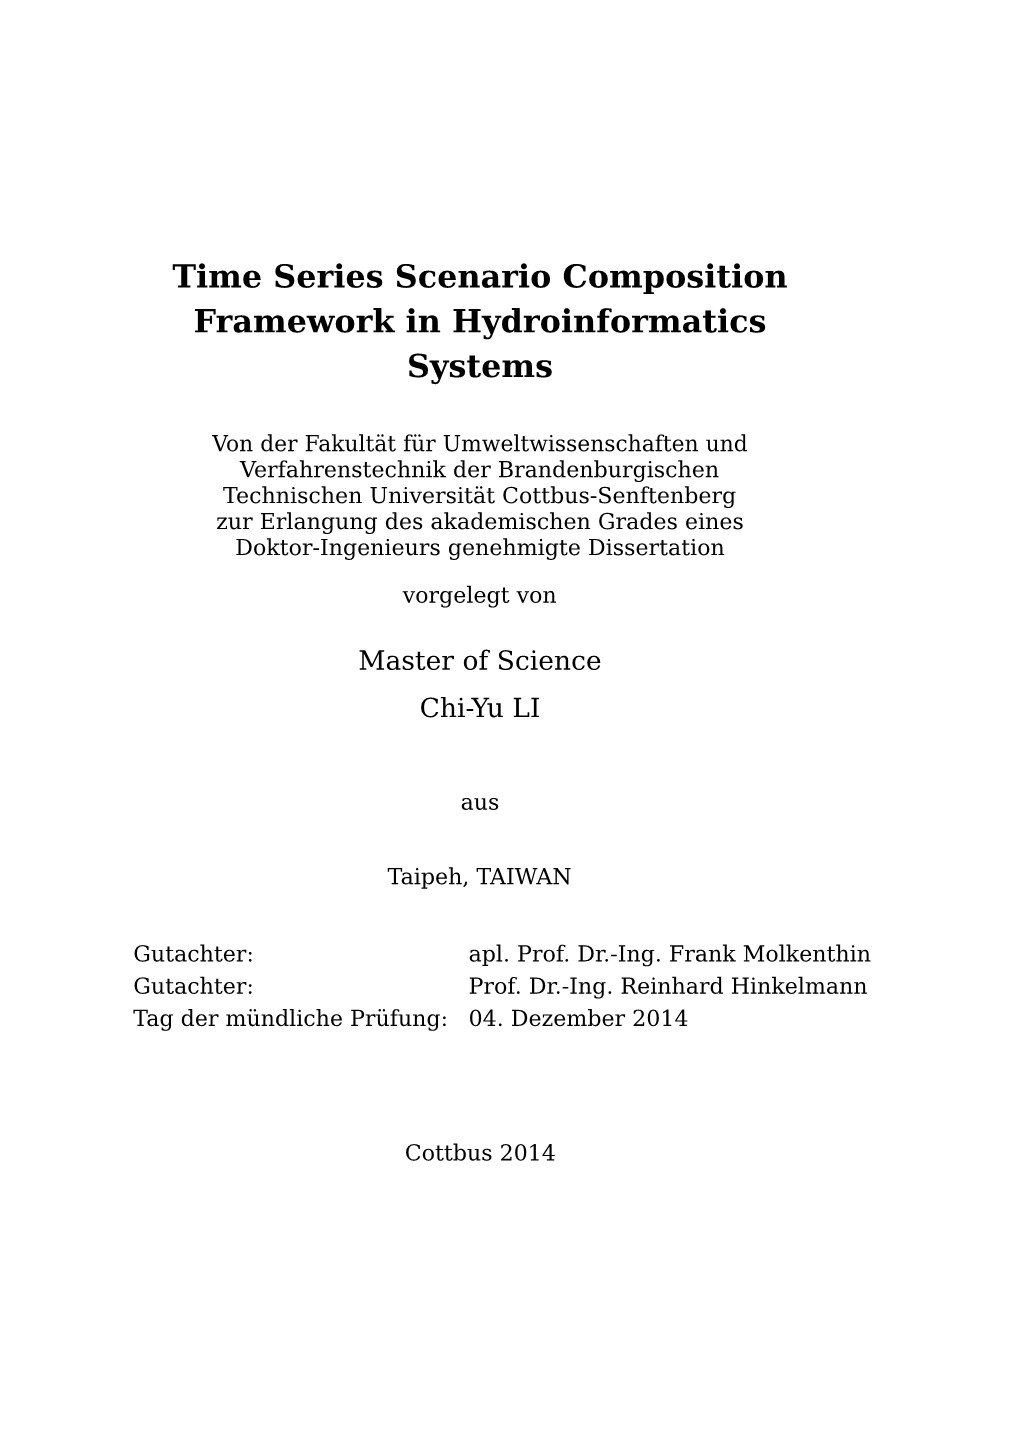 Time Series Scenario Composition Framework in Hydroinformatics Systems